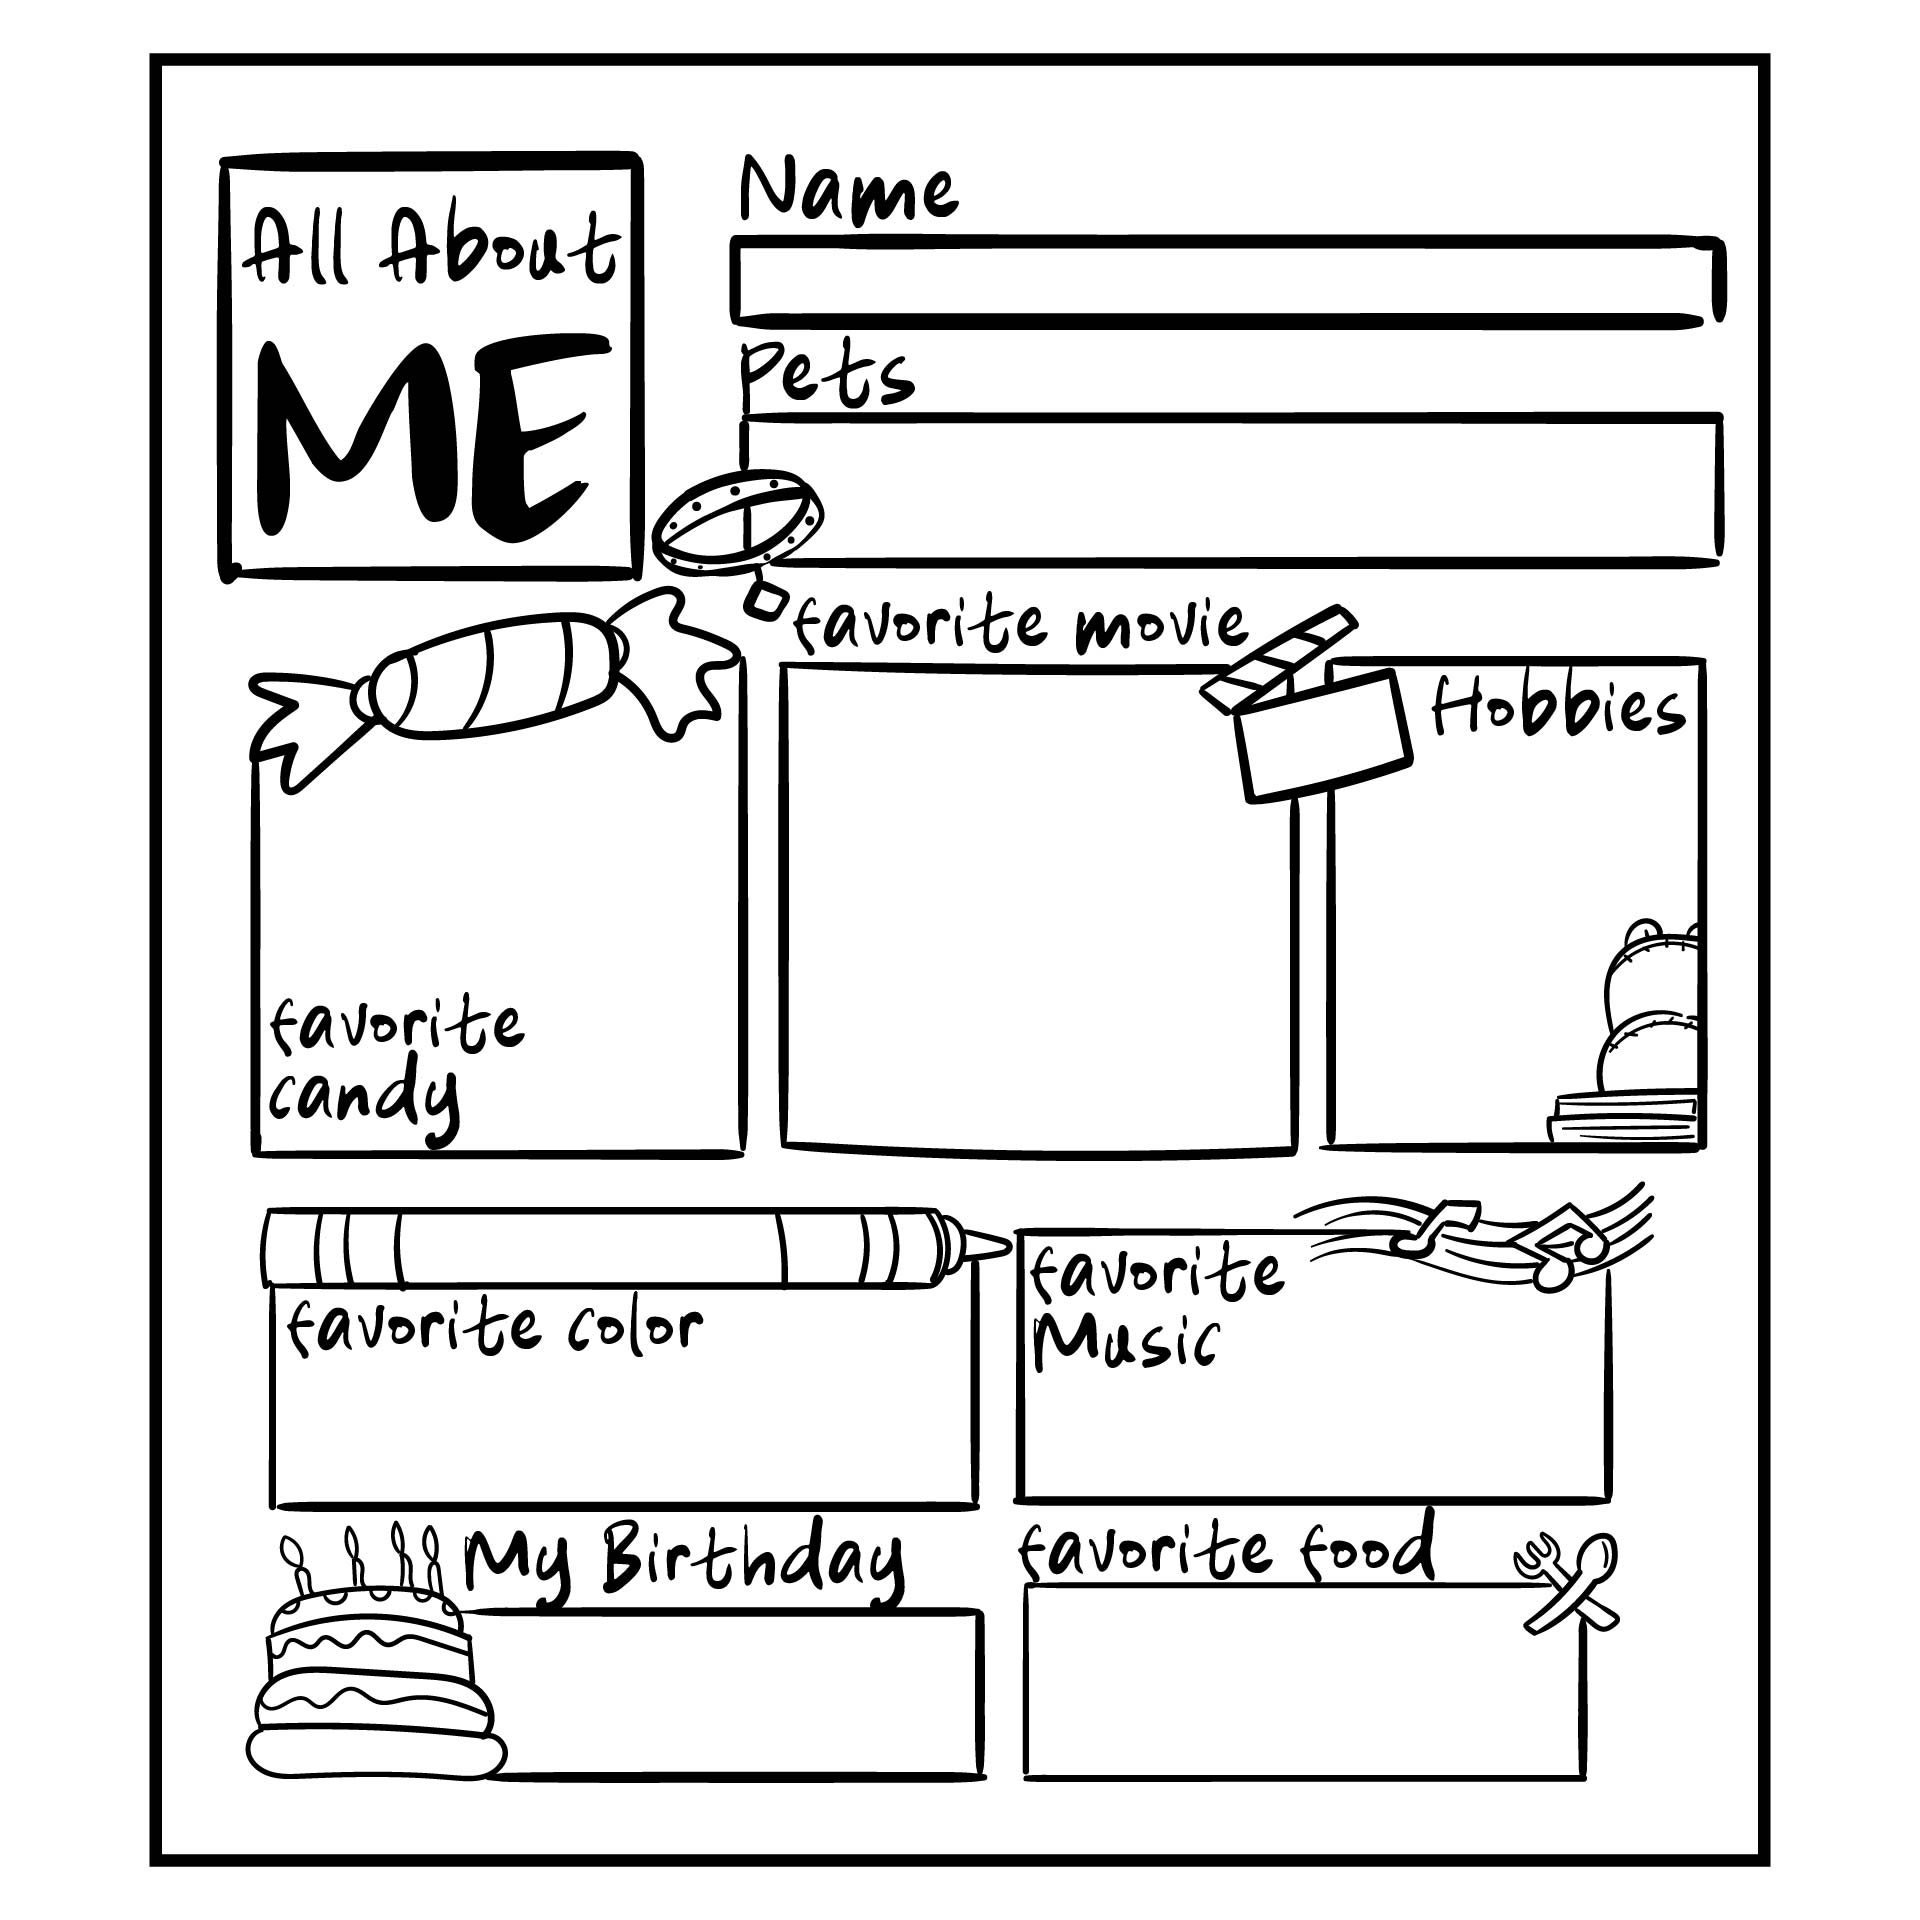 6-best-images-of-student-all-about-me-printable-all-about-me-student